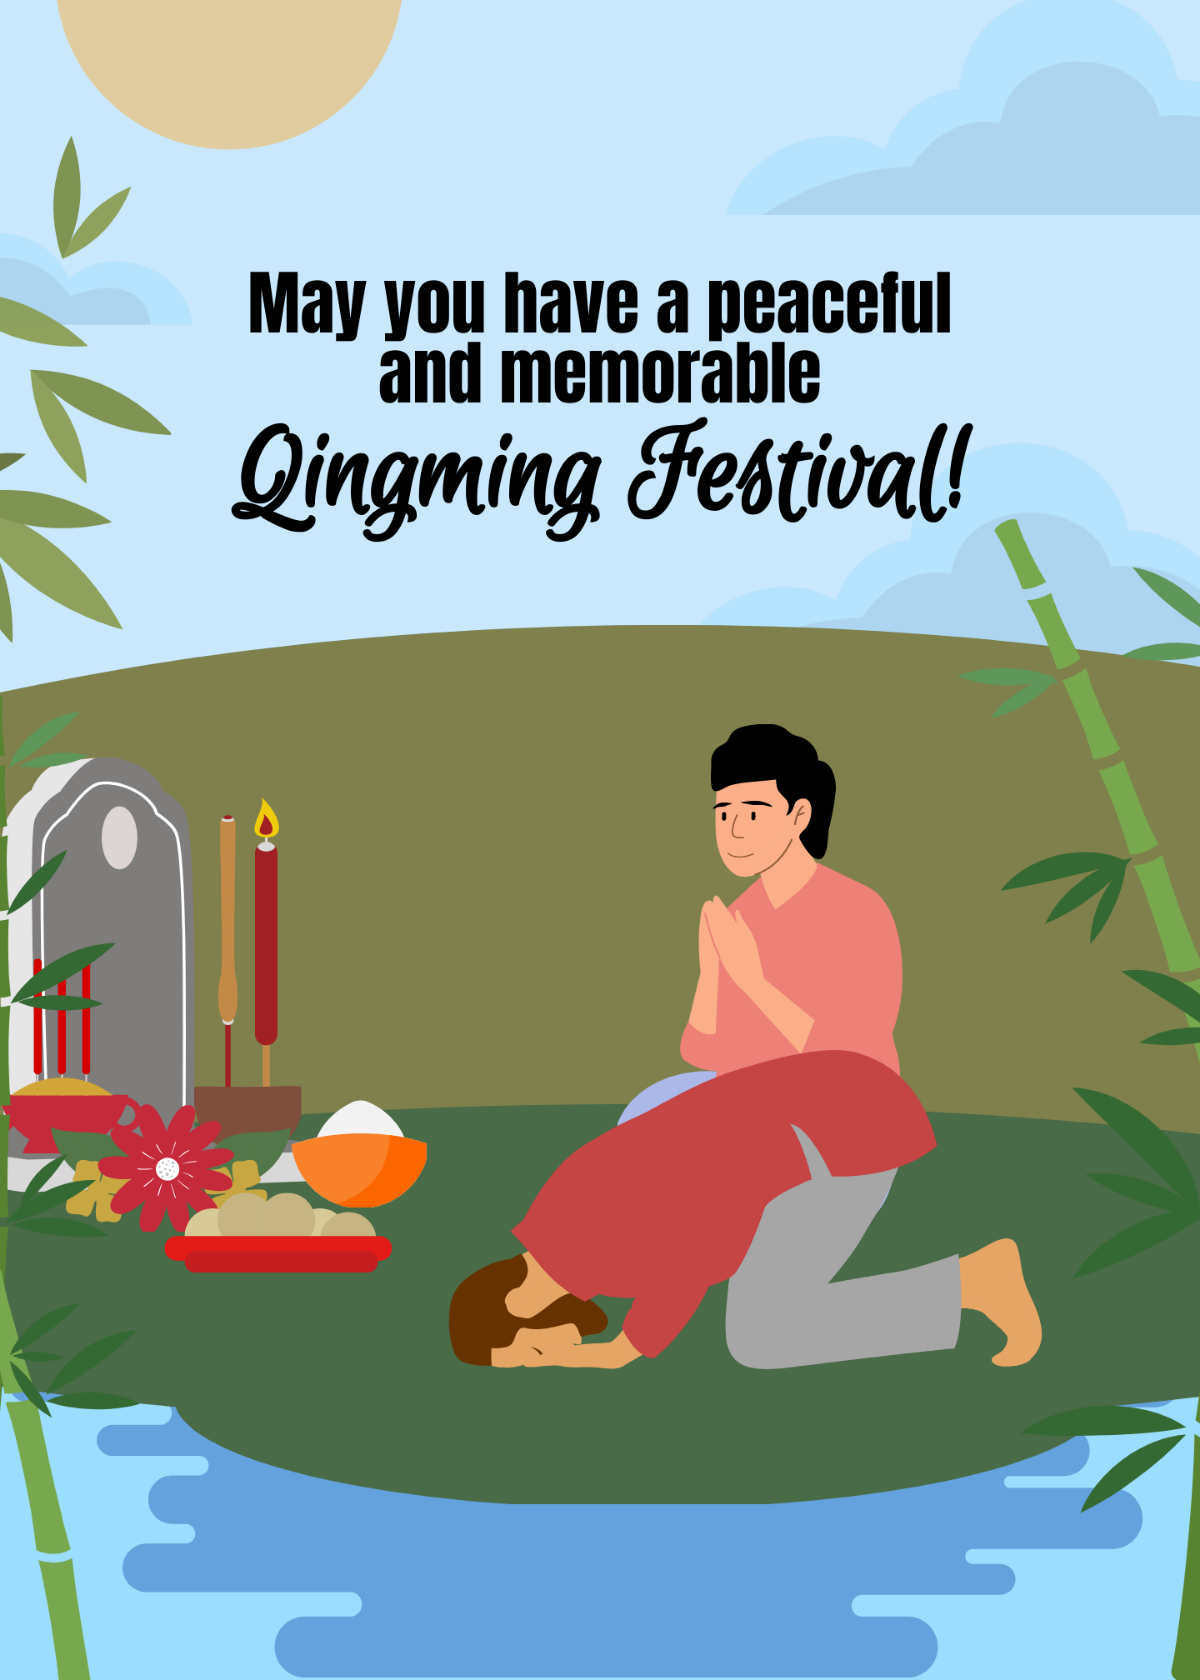 Free Qingming Festival Wishes Template